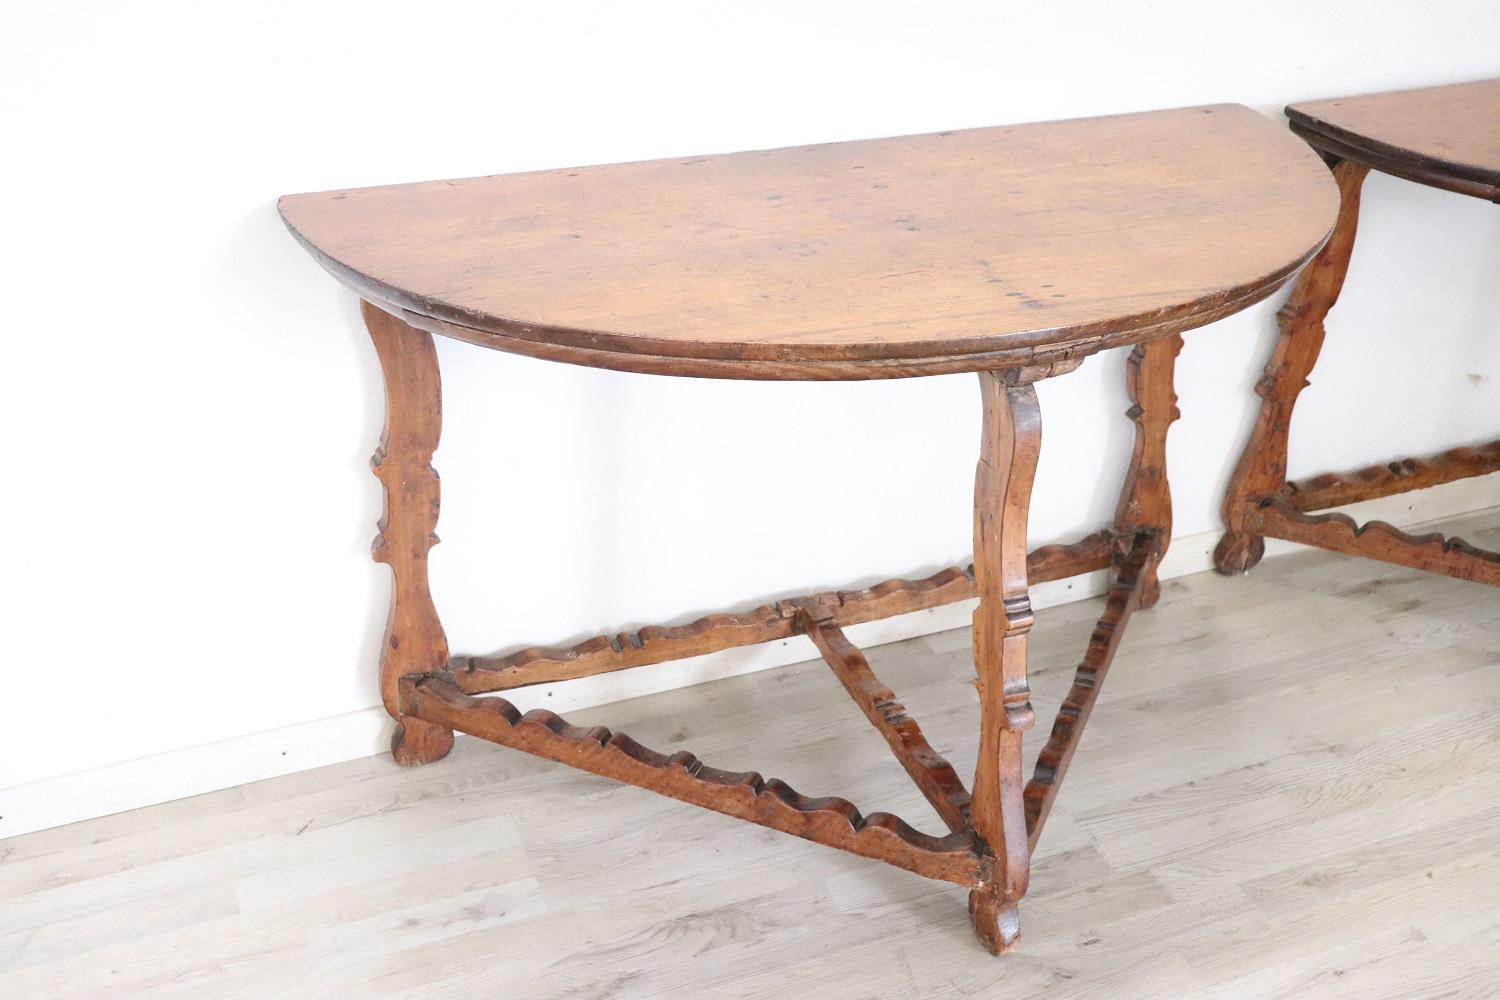 Important antique solid walnut pair of console table 1680s. Walnut wood has acquired a beautiful antique patina presenting the signs of all the past centuries. The signs of the passage of time on this console table top are a merit that certify its